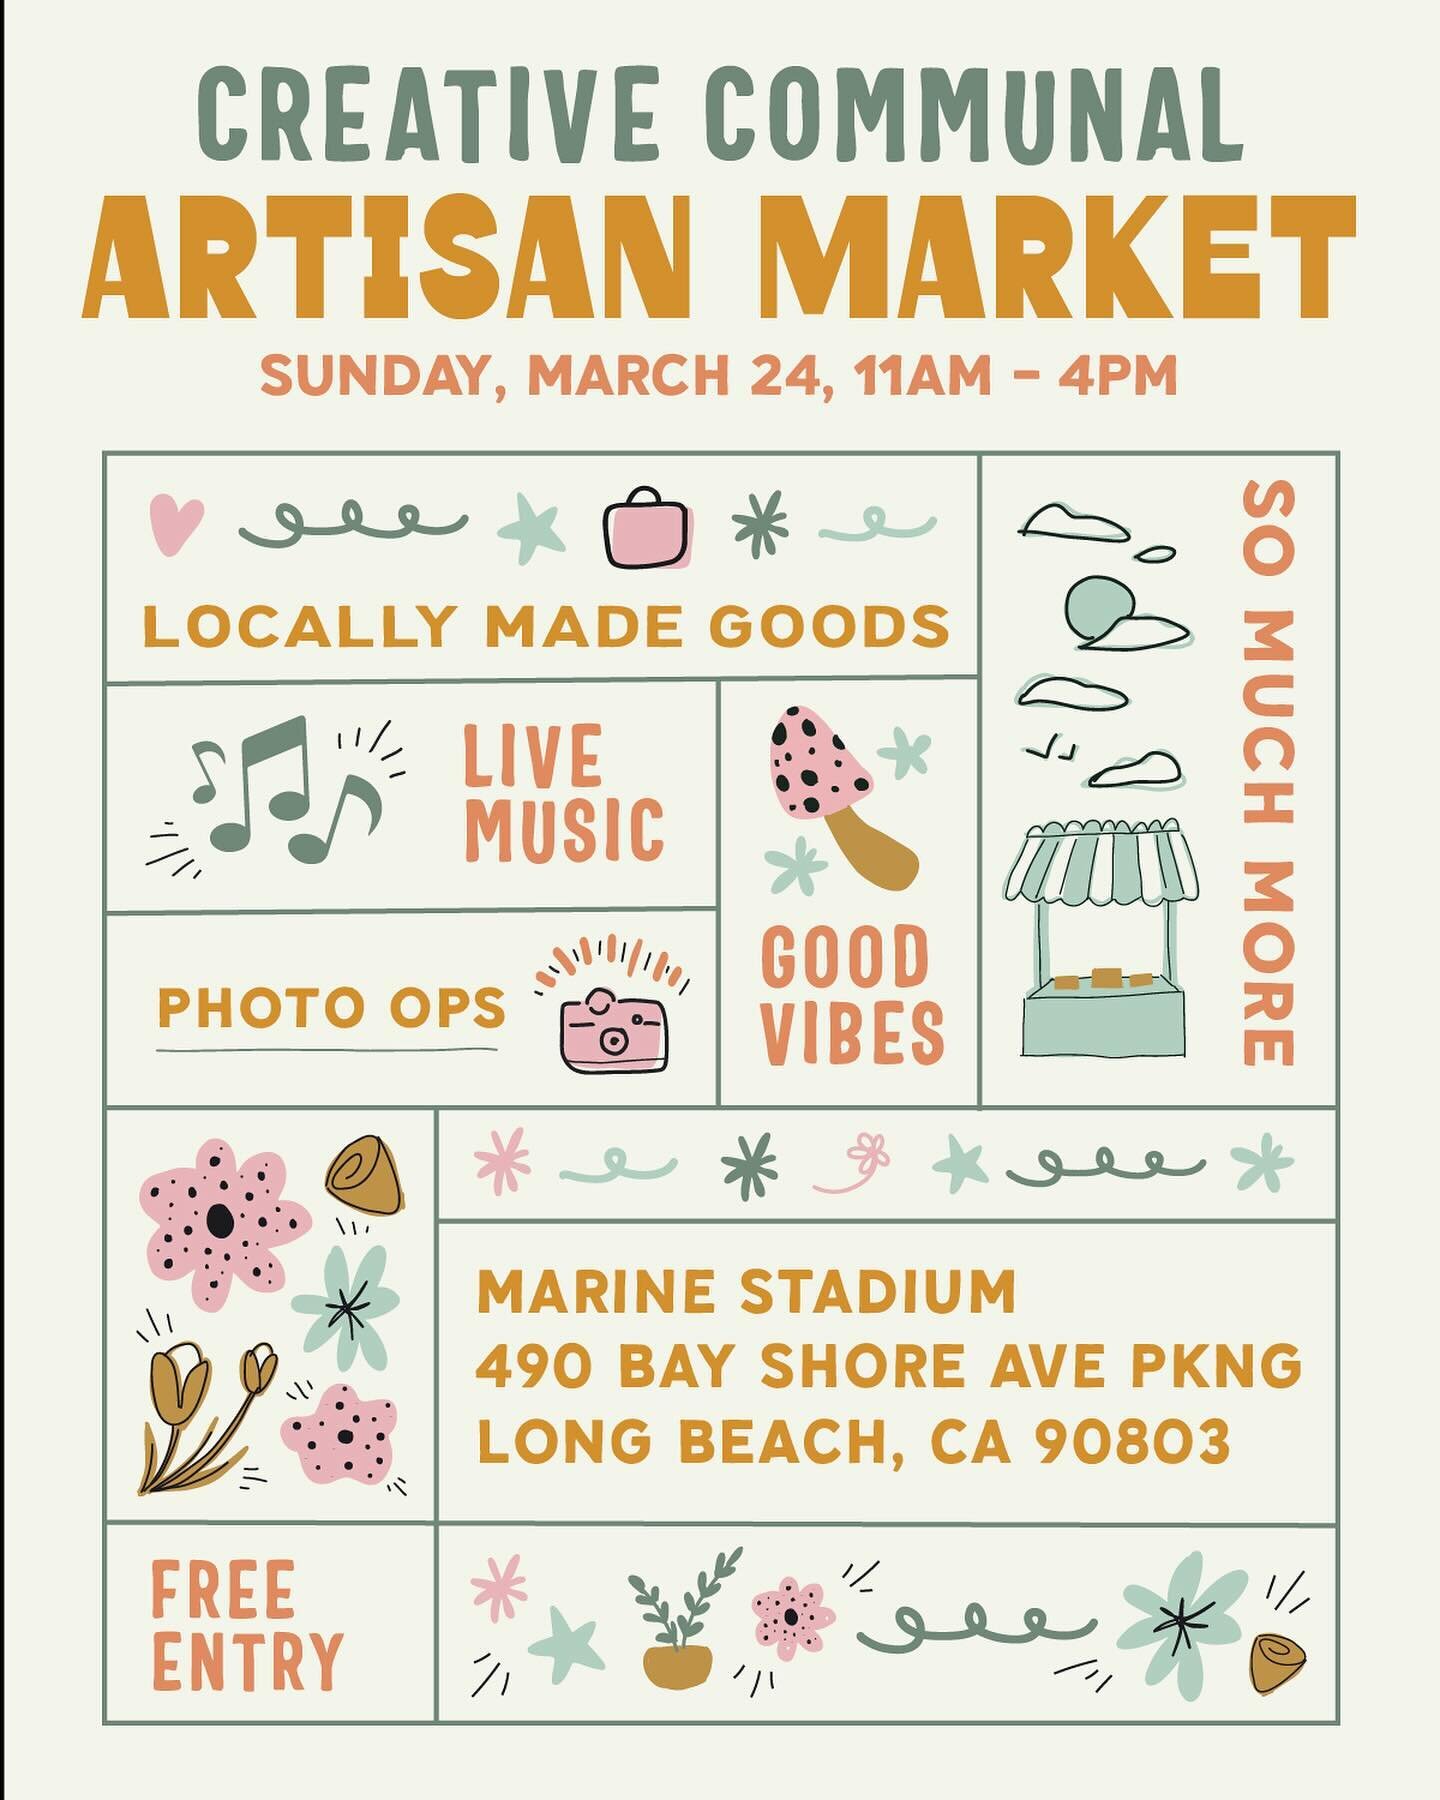 Long Beach Fam,
We have missed you! Help kick off our first Long Beach Artisan Market of the year in a beautiful new location!
Find artisan goods and gifts from LOCAL MAKERS. - find something for everyone! 🌞

🐰 FREE Easter Bunny Photos 11AM-2PM
☕ C